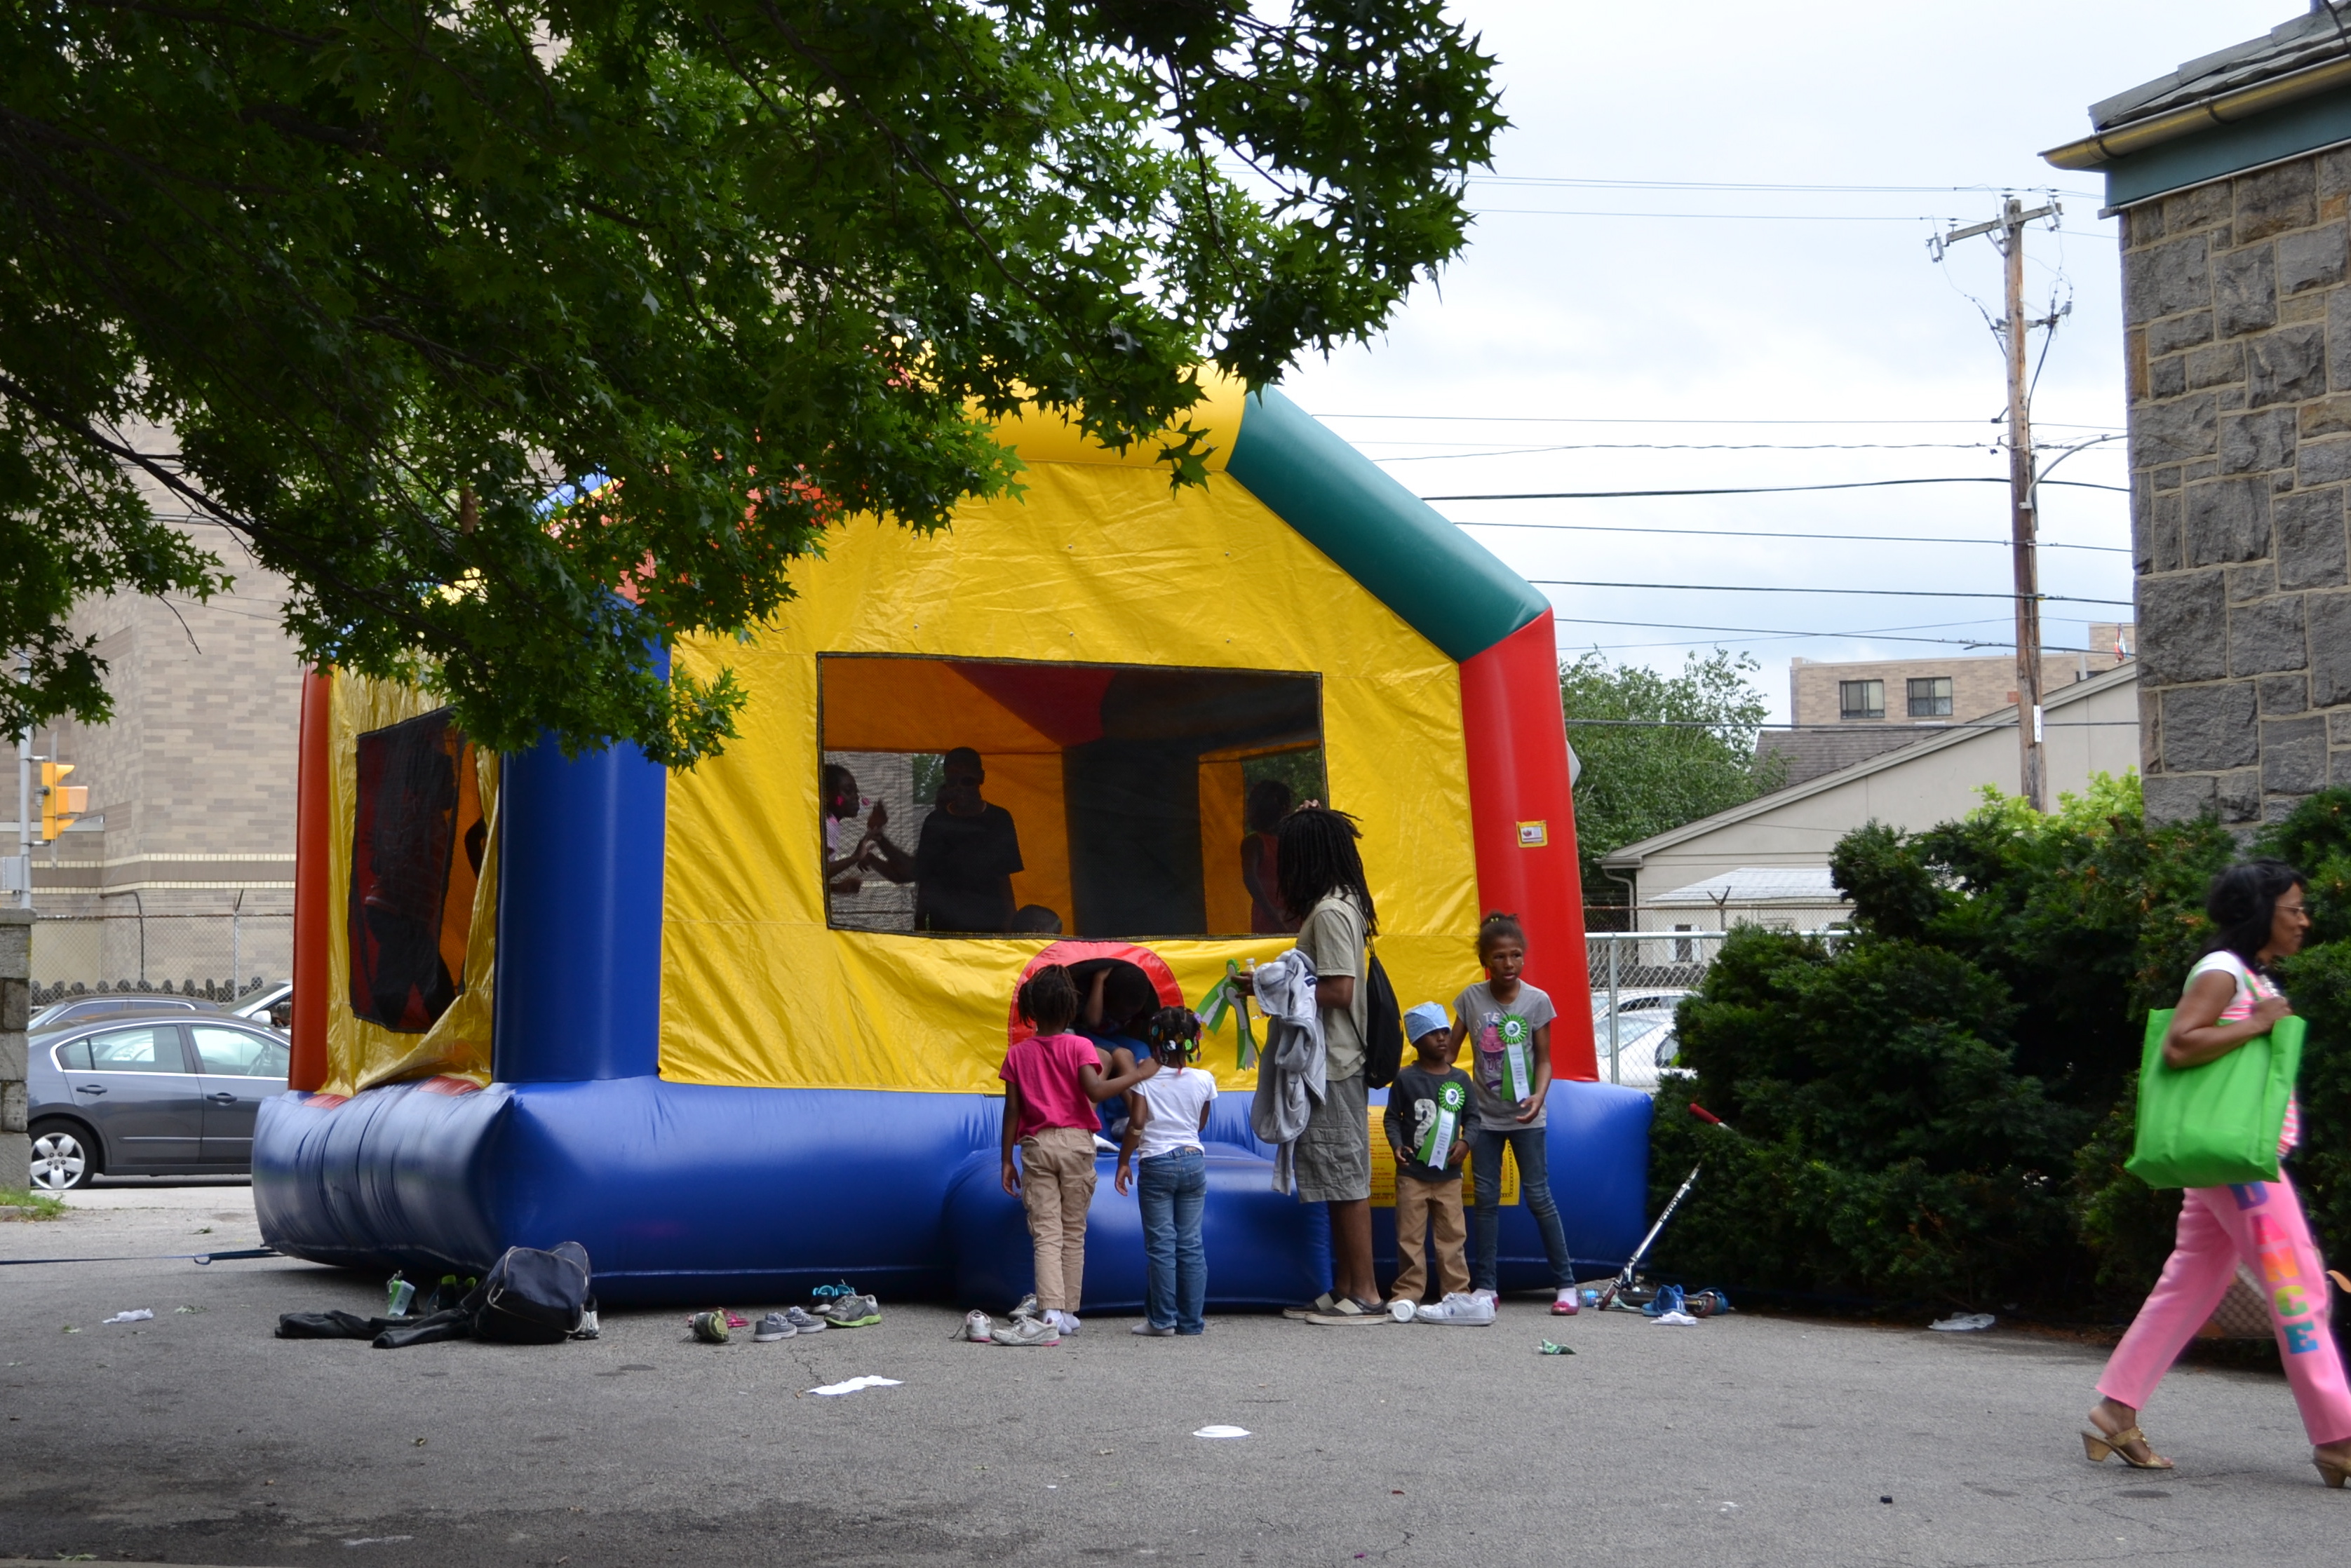 Festivities included a bounce house, dance performances and more